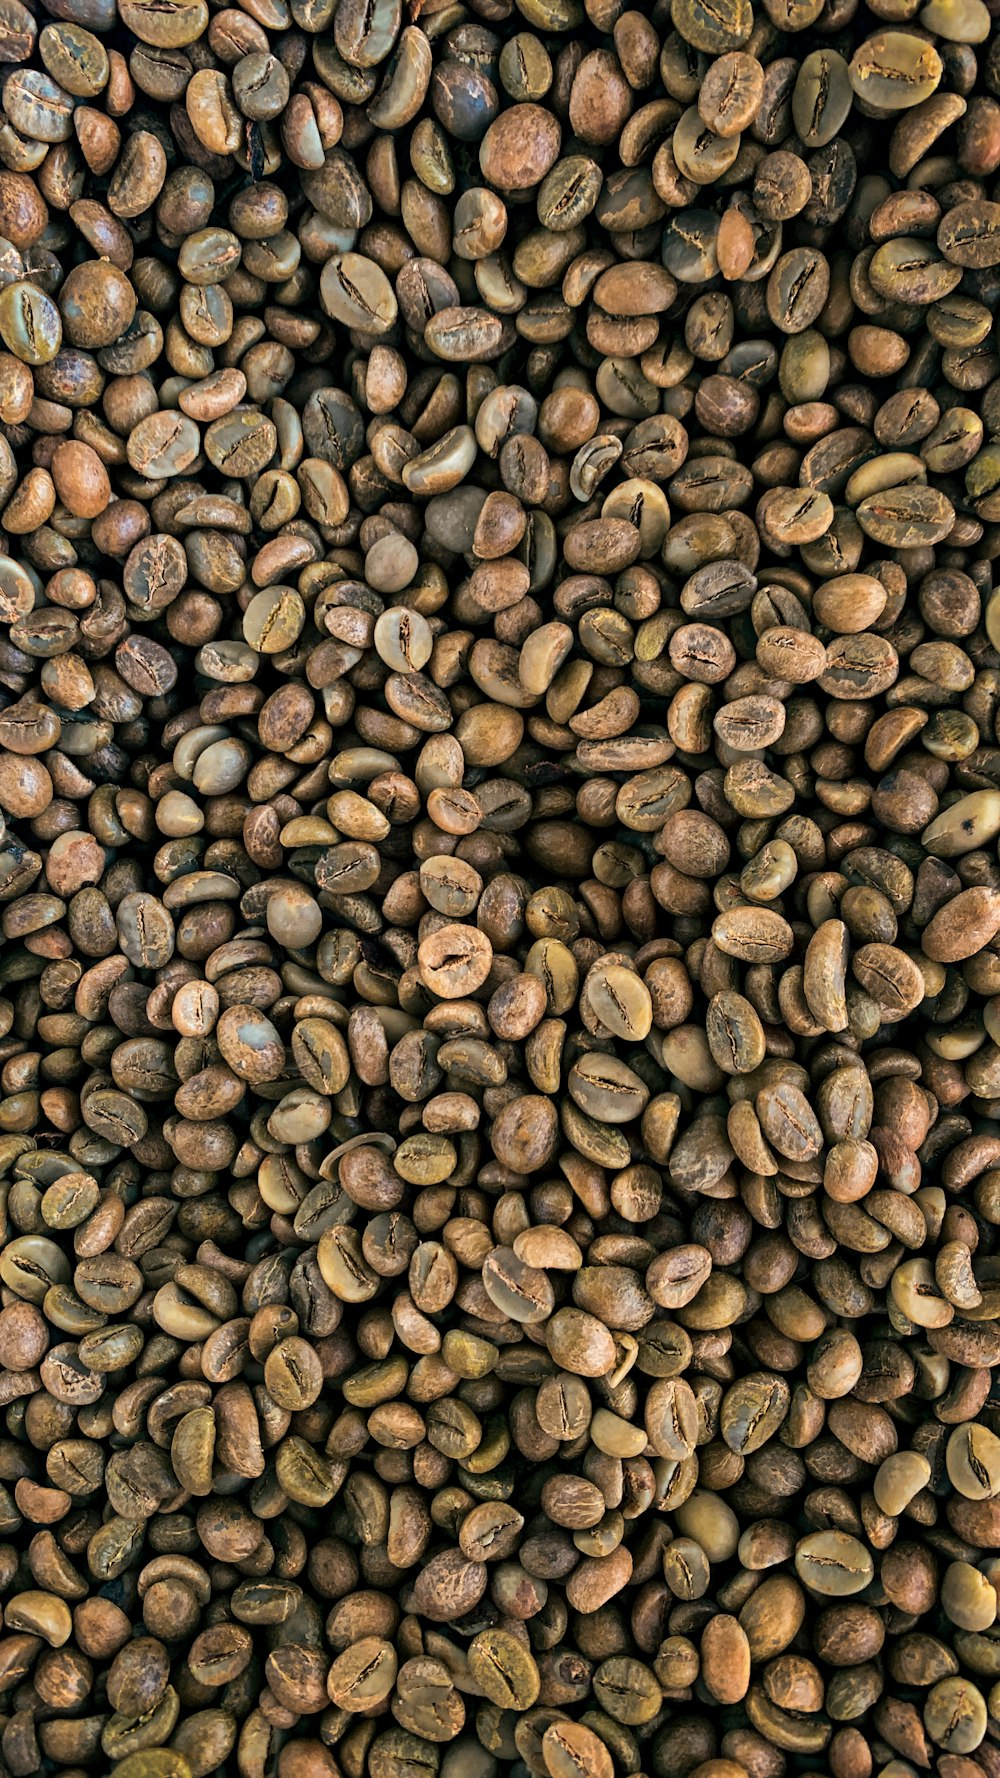 a large pile of coffee beans is shown